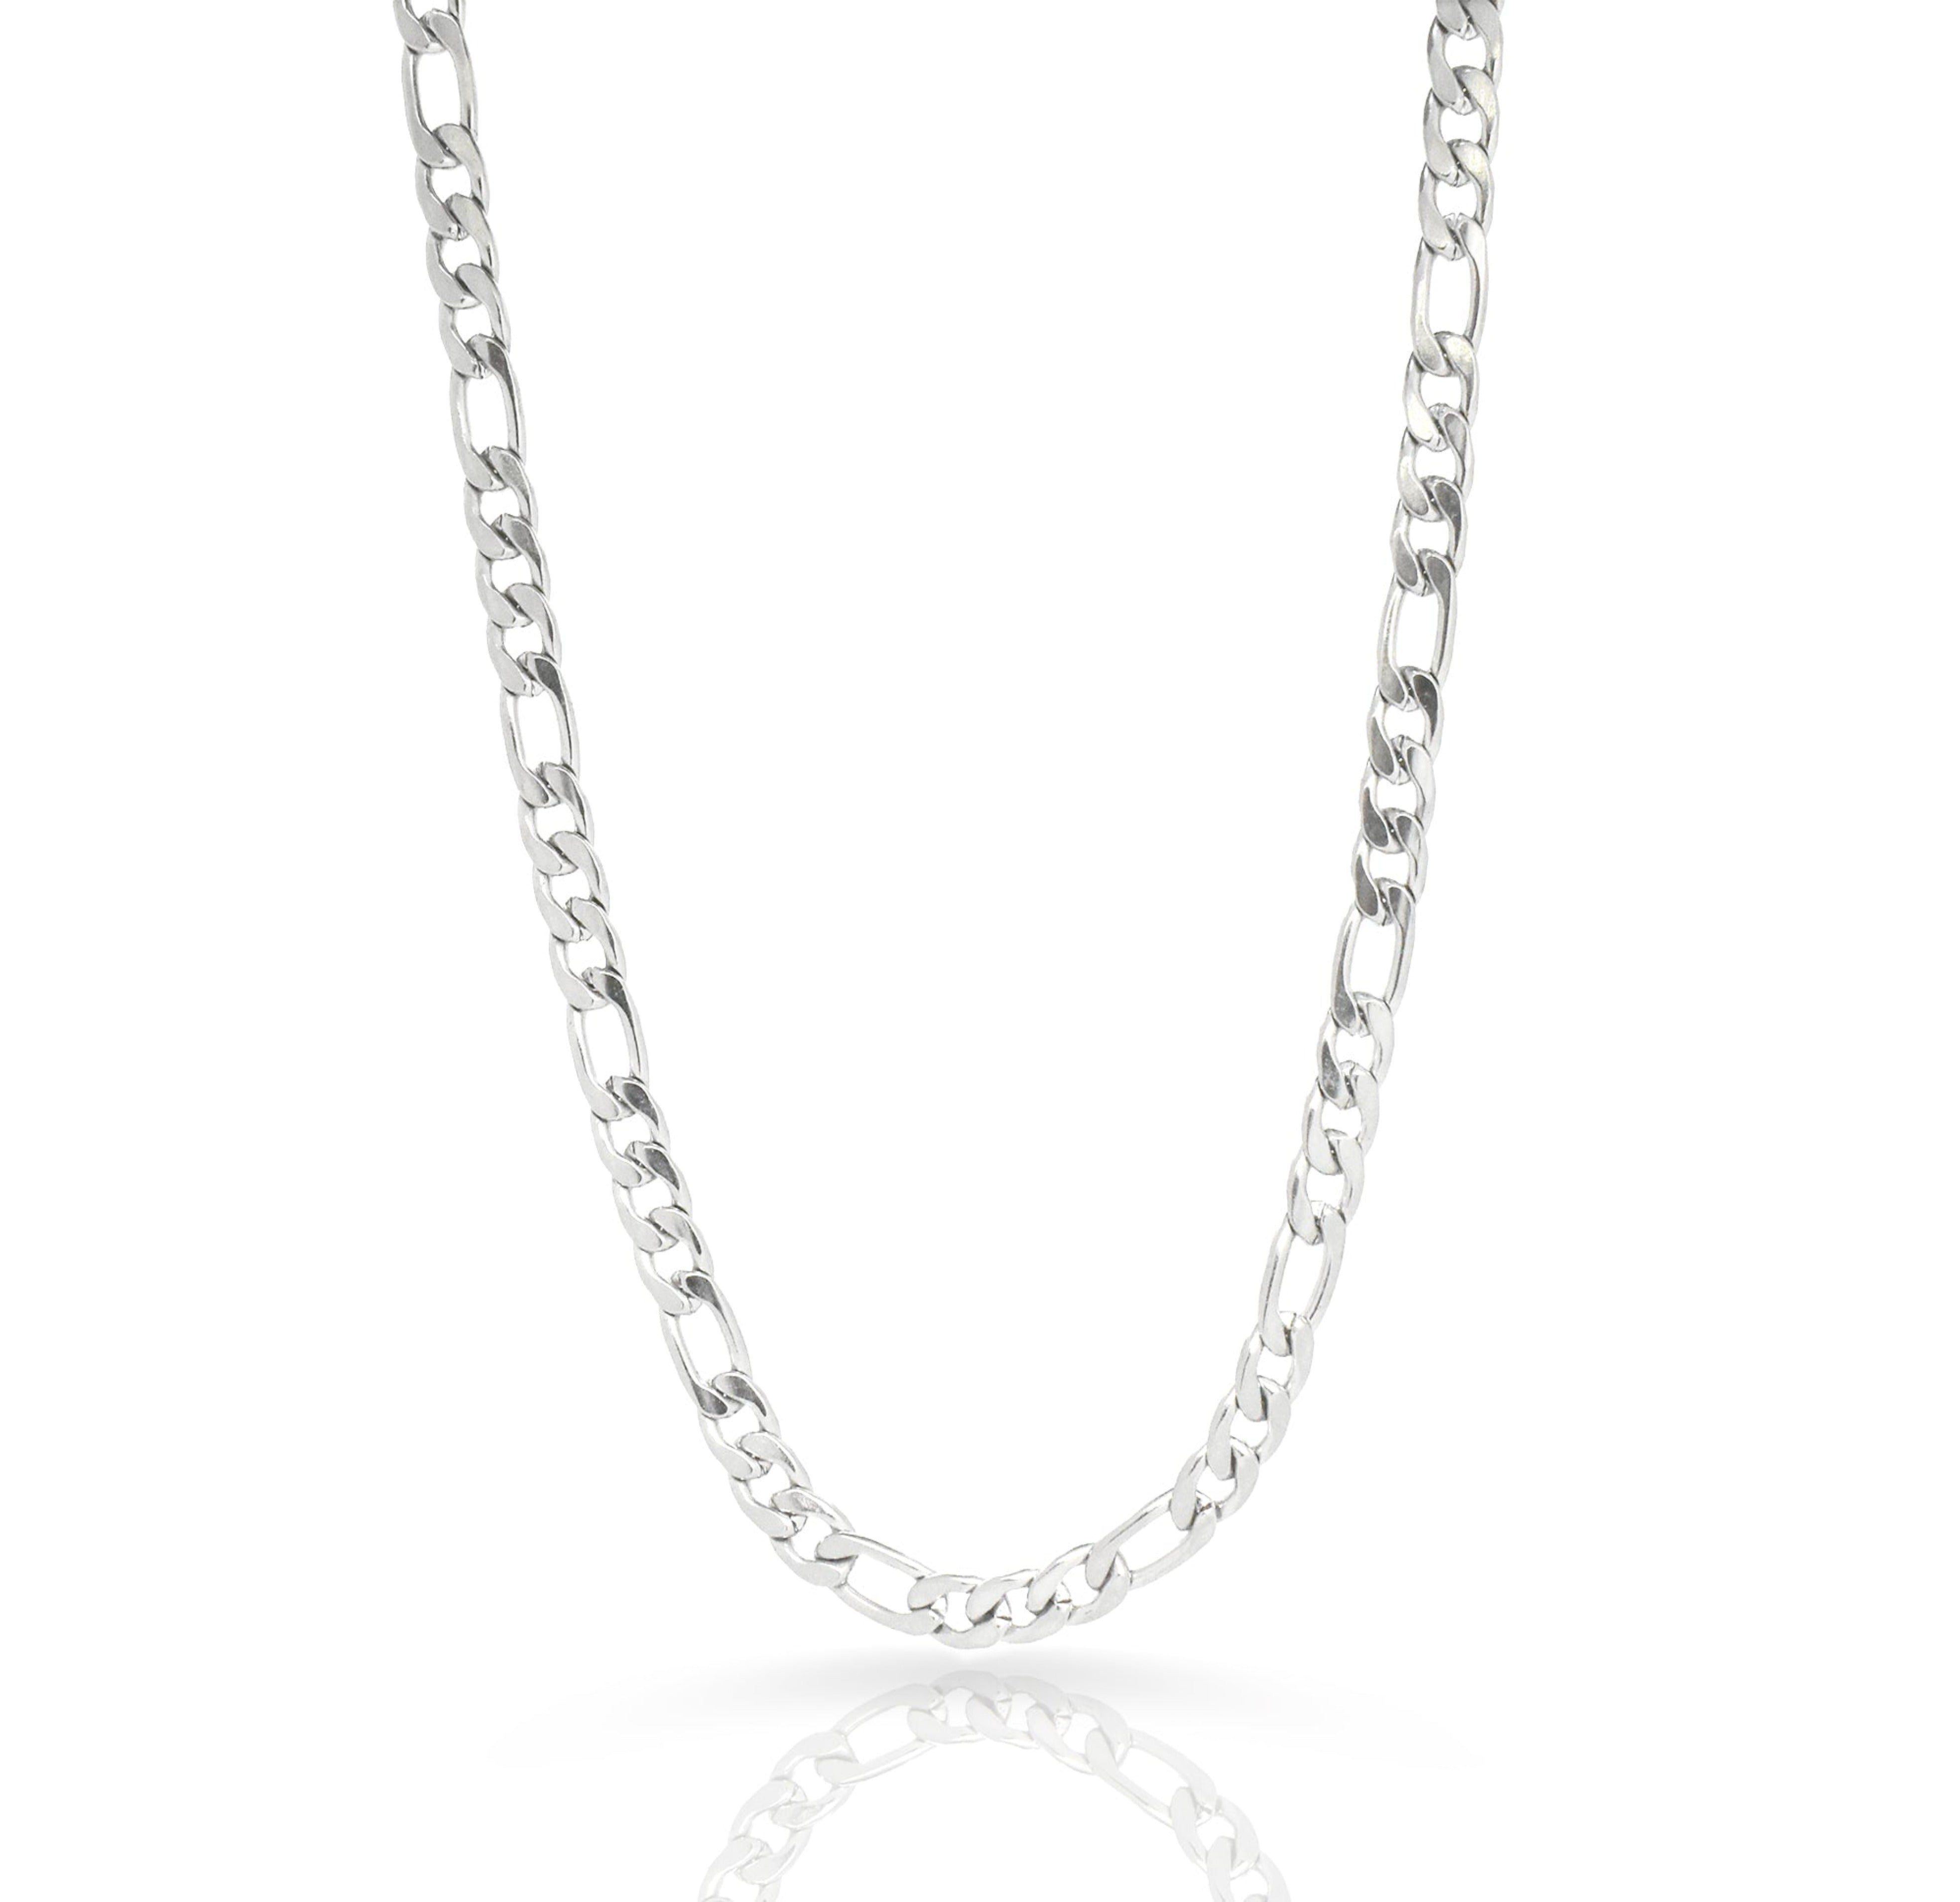 silver waterproof chain necklace